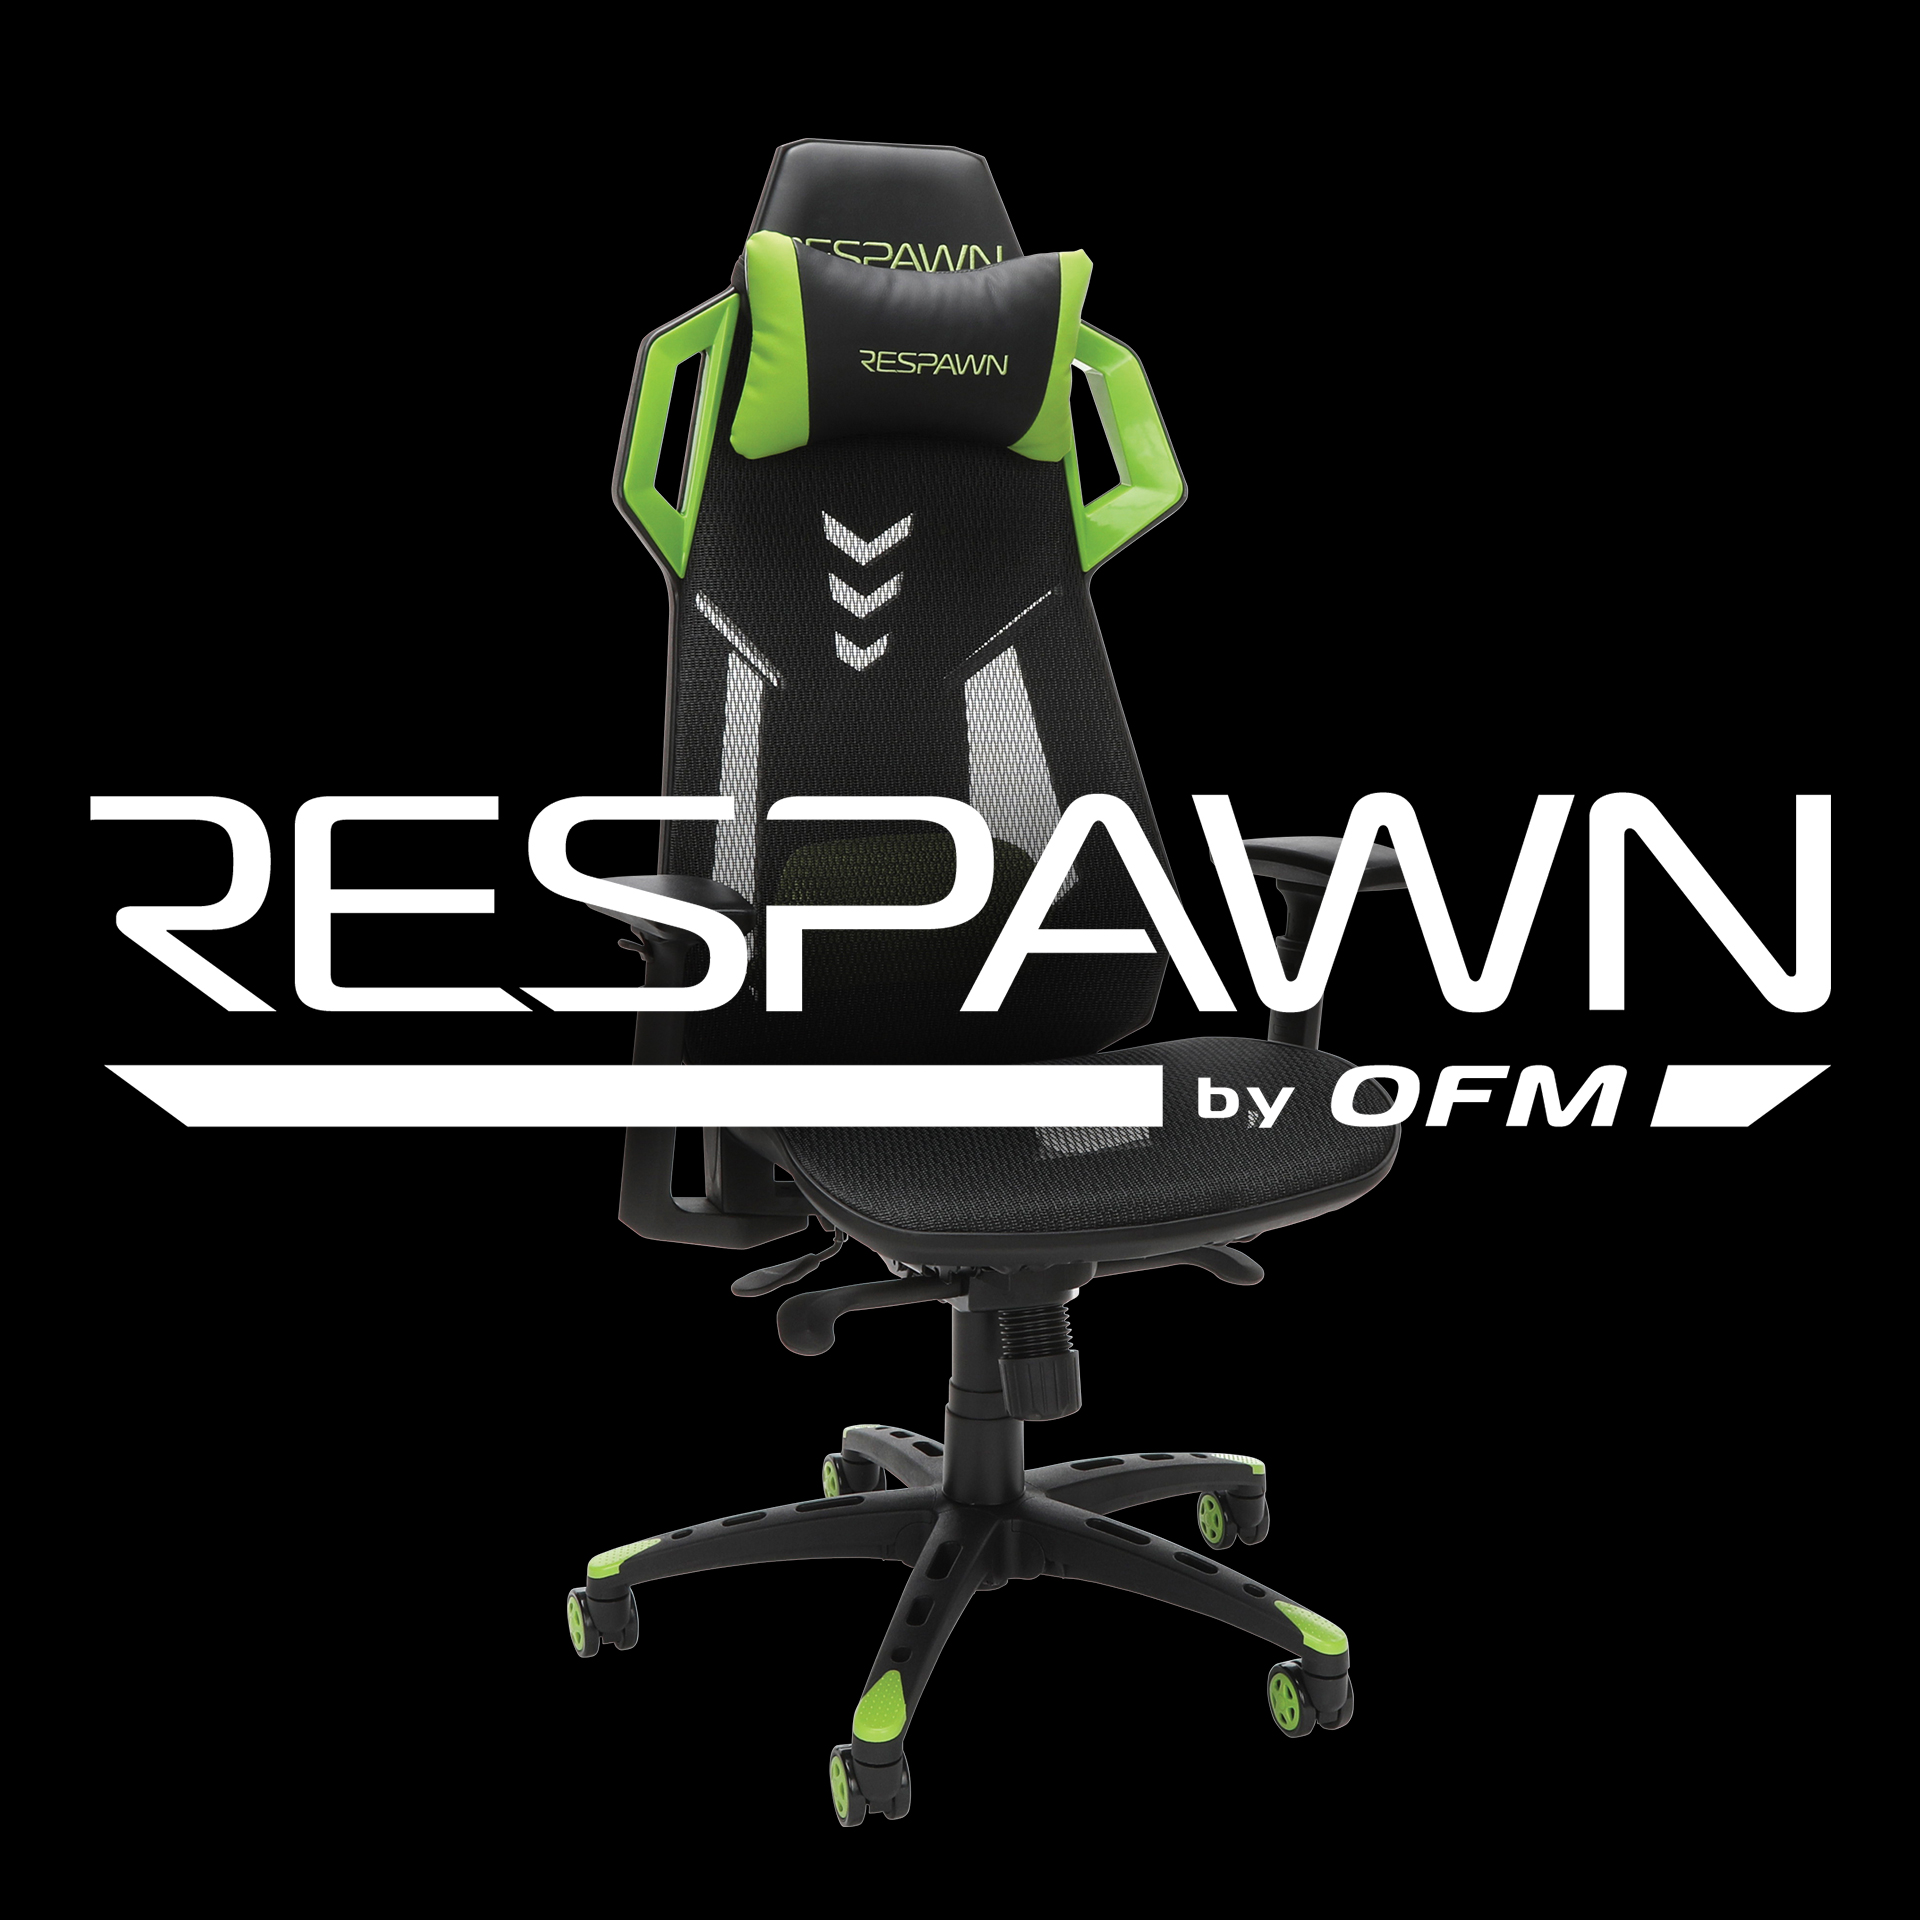 Omar, Winner of the Respawn Gaming Chair